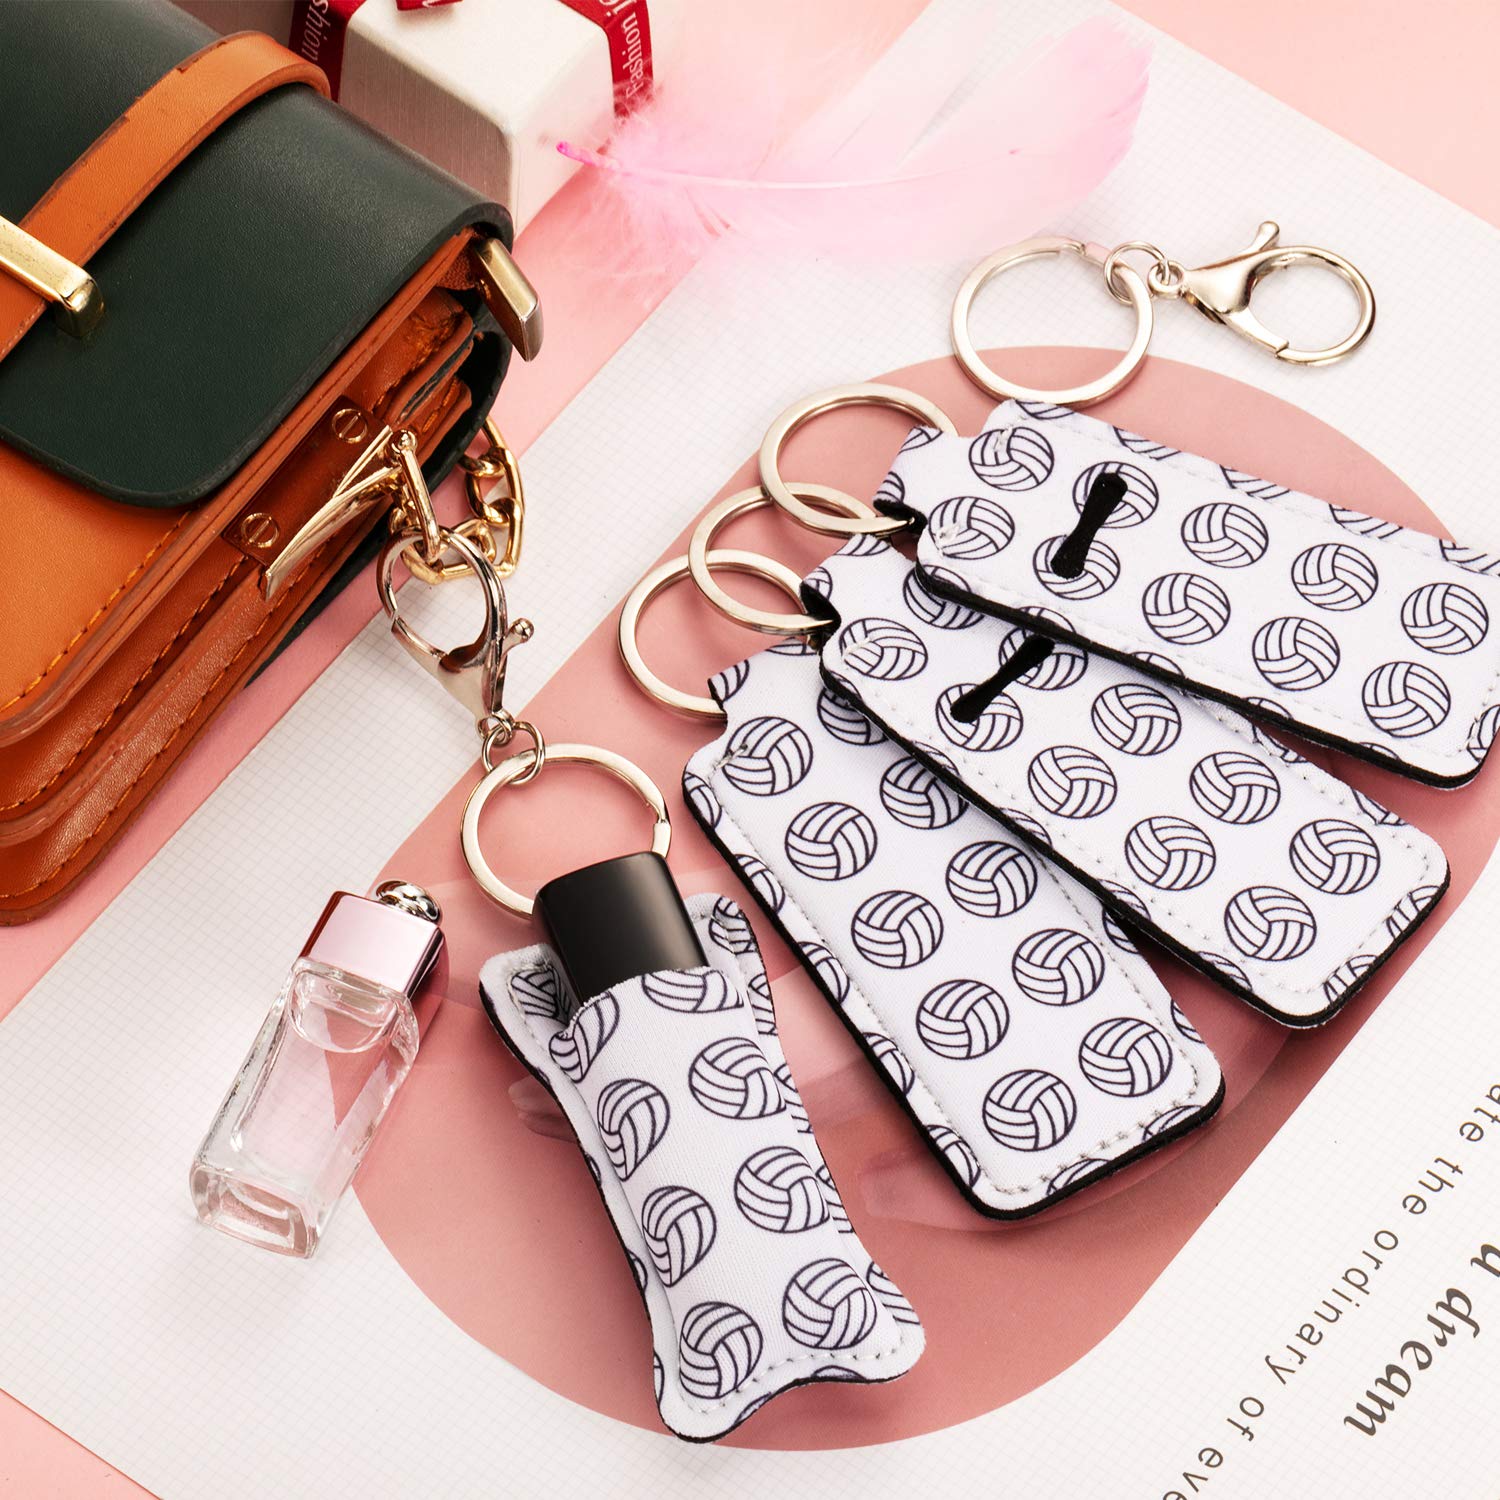 16 Pieces Volleyball Lipstick Holder Keychains Volleyball Lipstick Balm Holder Keychain Clip-on Lipstick Sleeve Pouch with 16 Pieces Metal Clip Cords for Lipstick Tracker